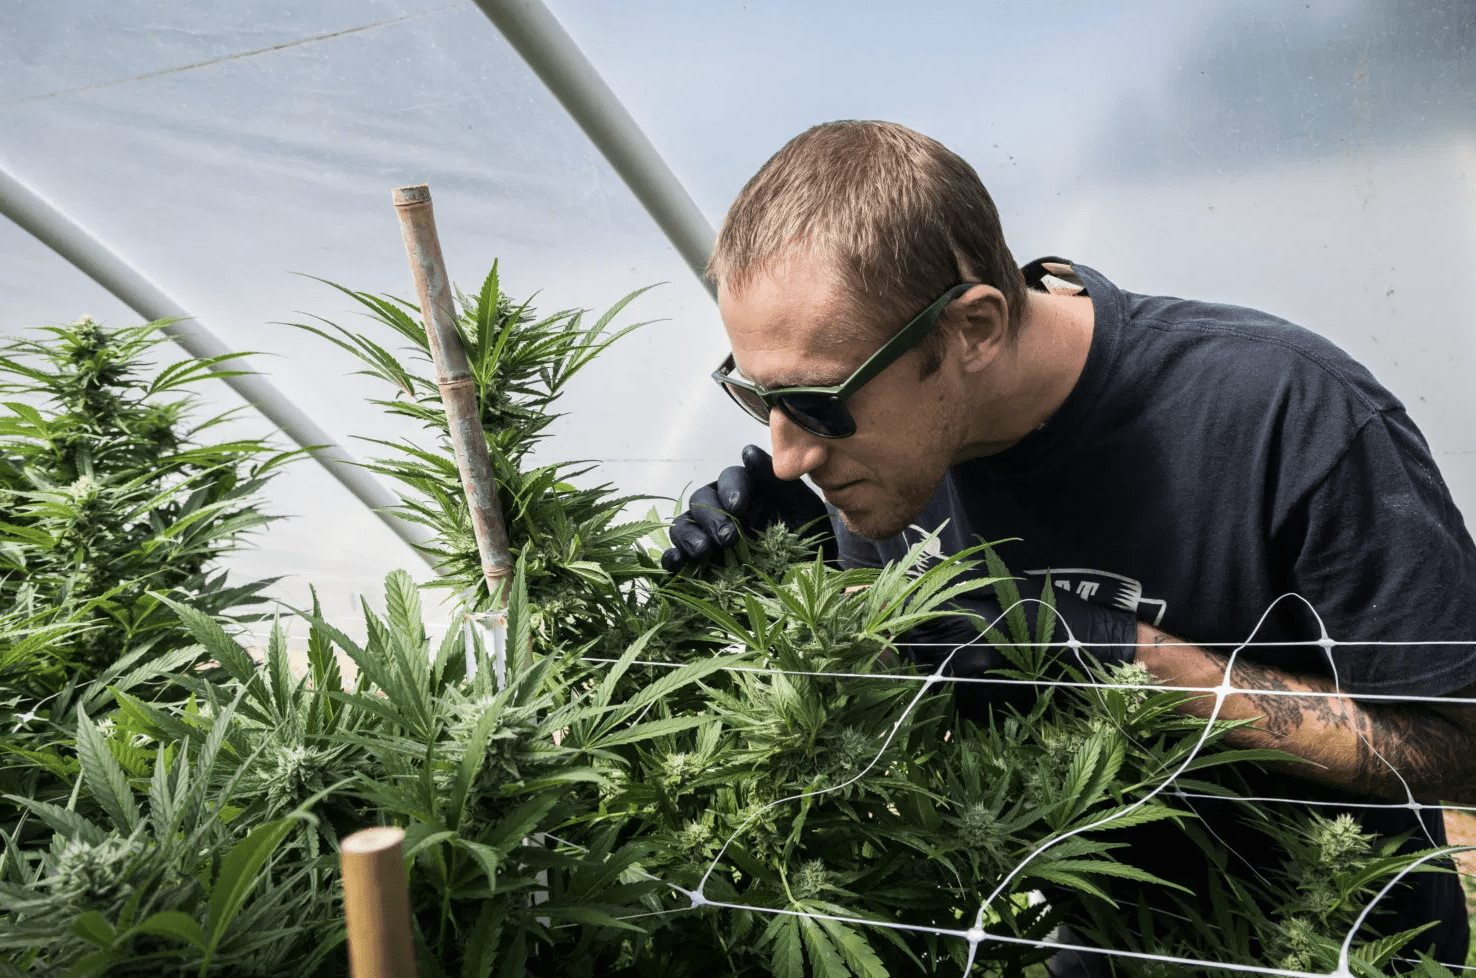 ben lind smelling cannabis plants in greenhouse